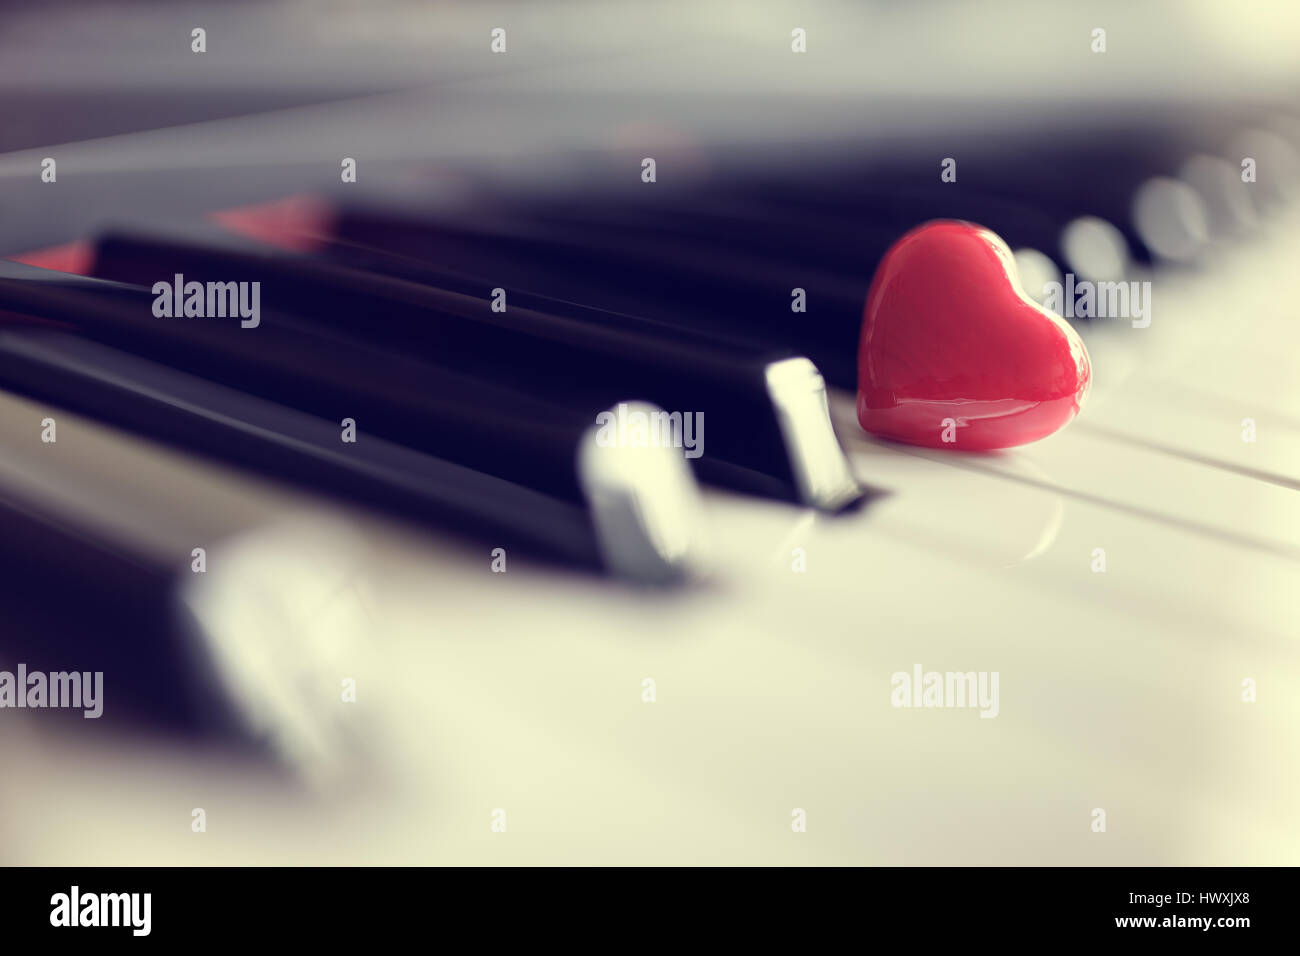 Red heart on piano keyboard keys concept for love of music or romance and valentines day Stock Photo